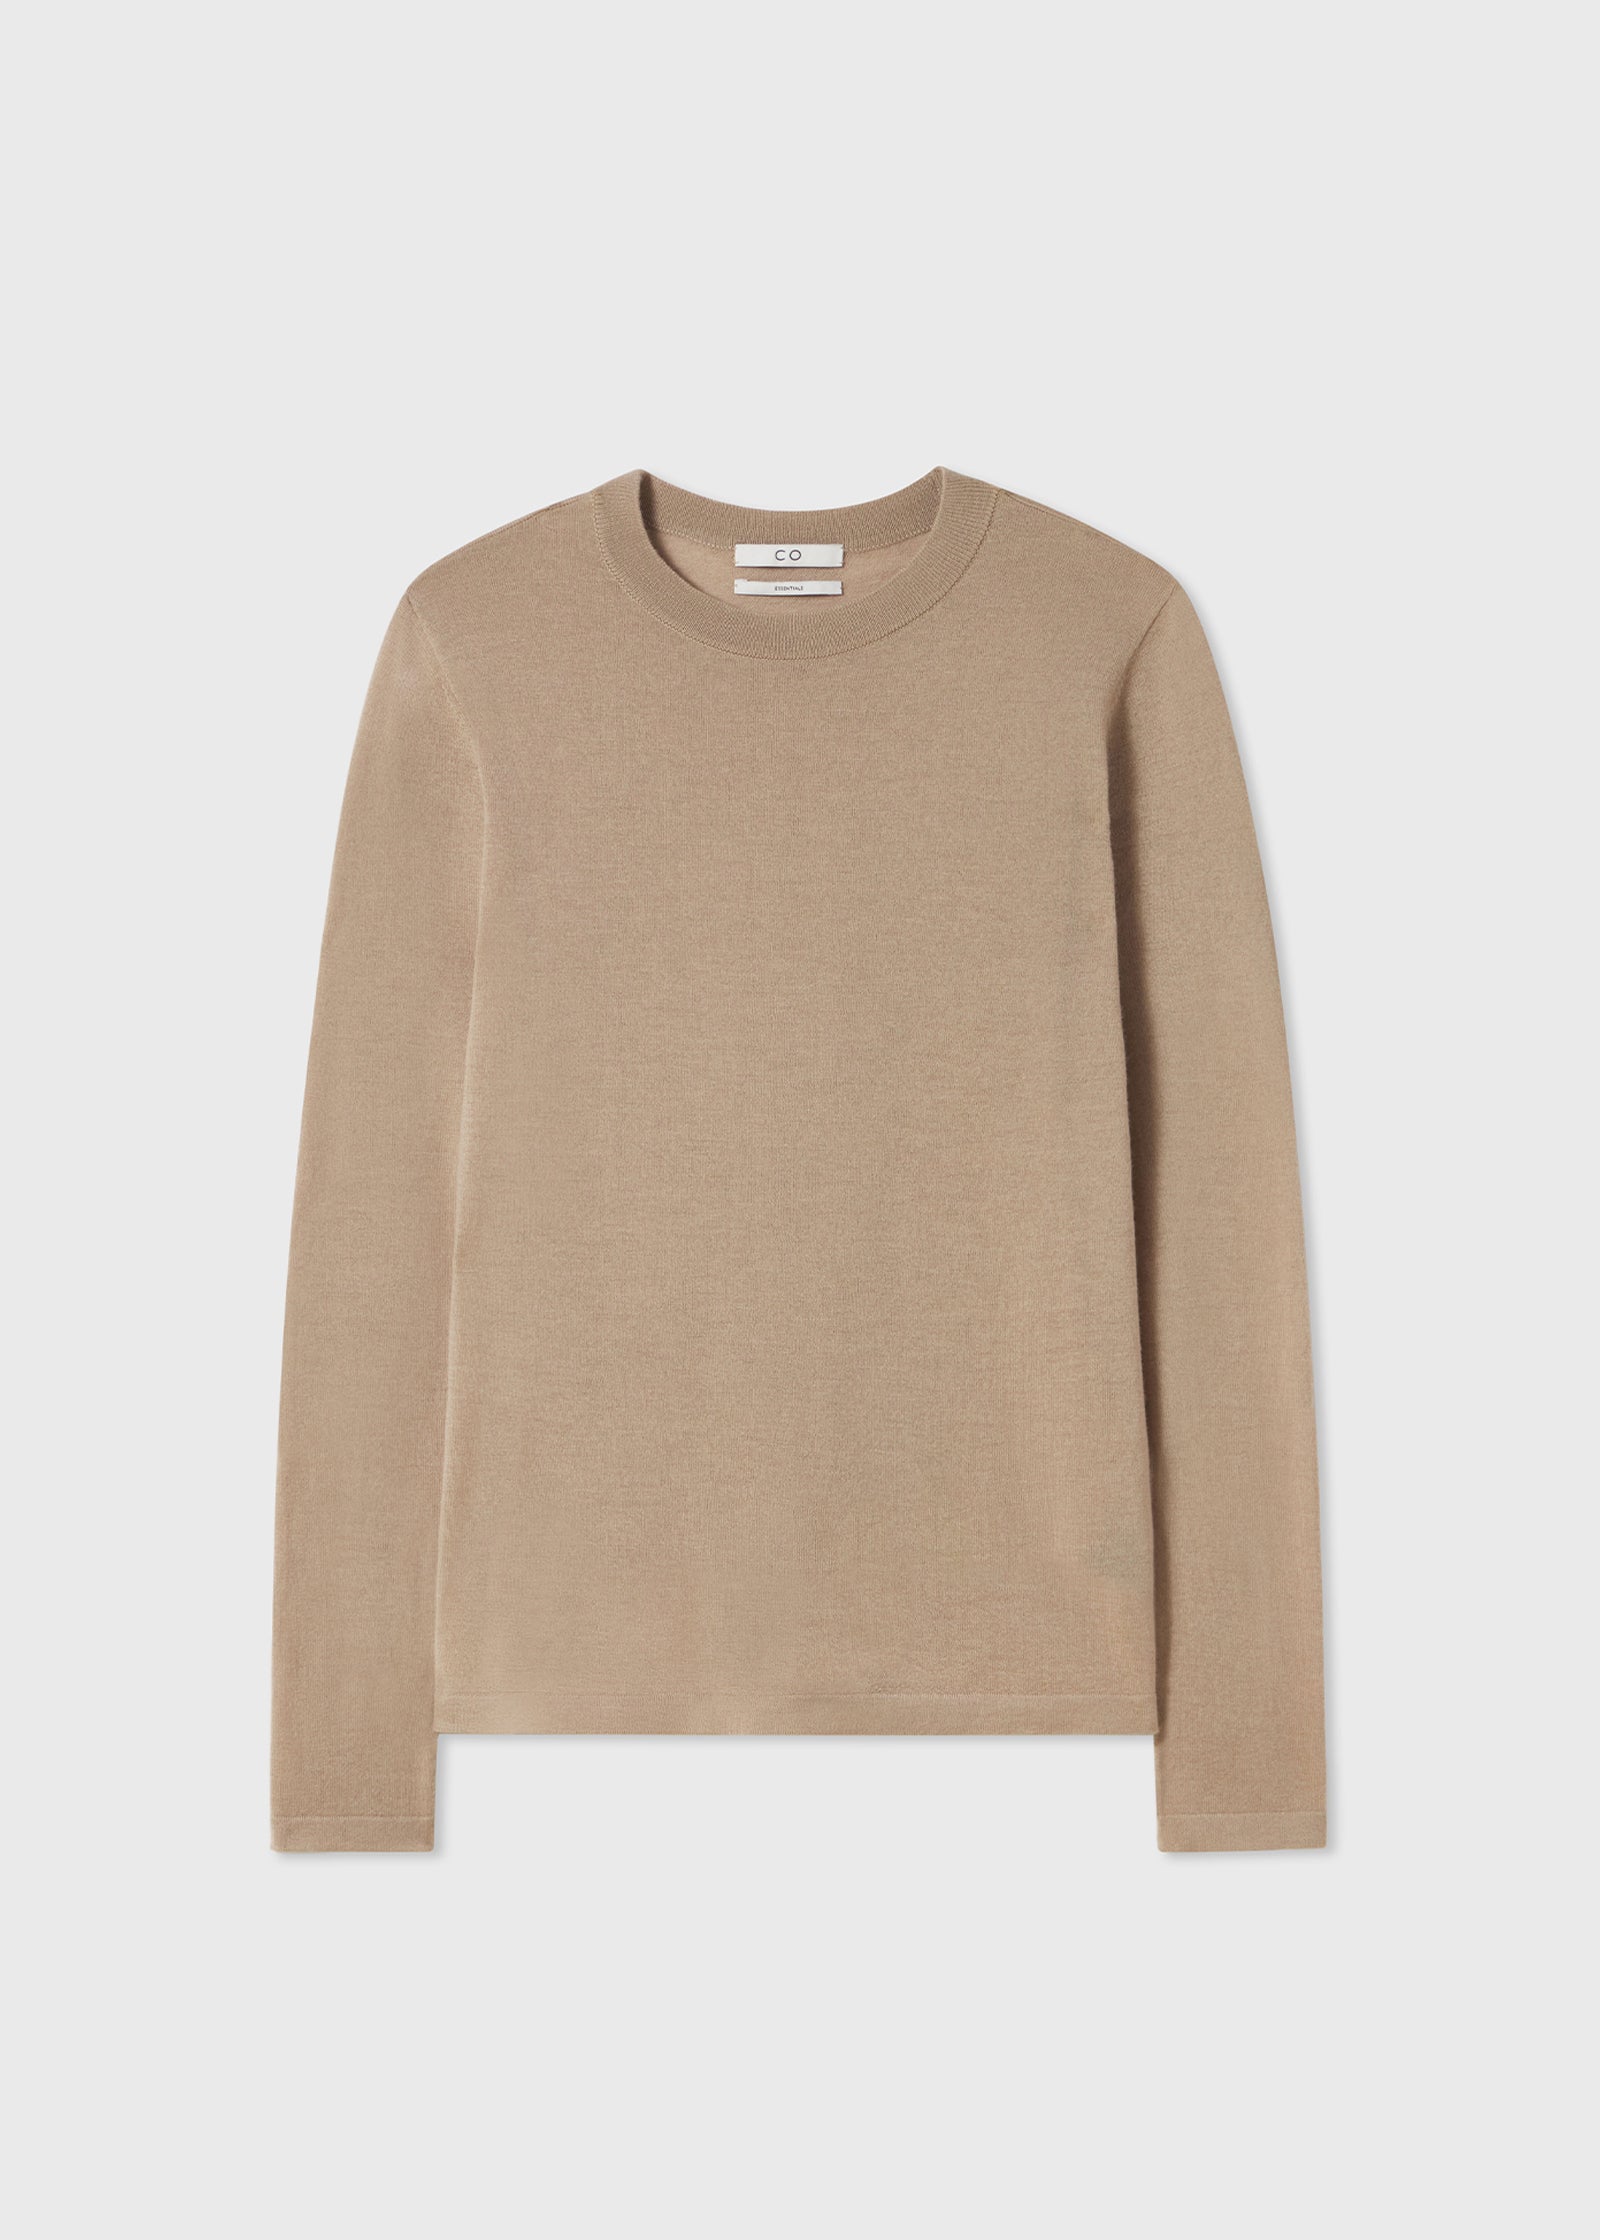 CO Cashmere Taupe Sleeve Tee | - Crew Long in Fine Neck